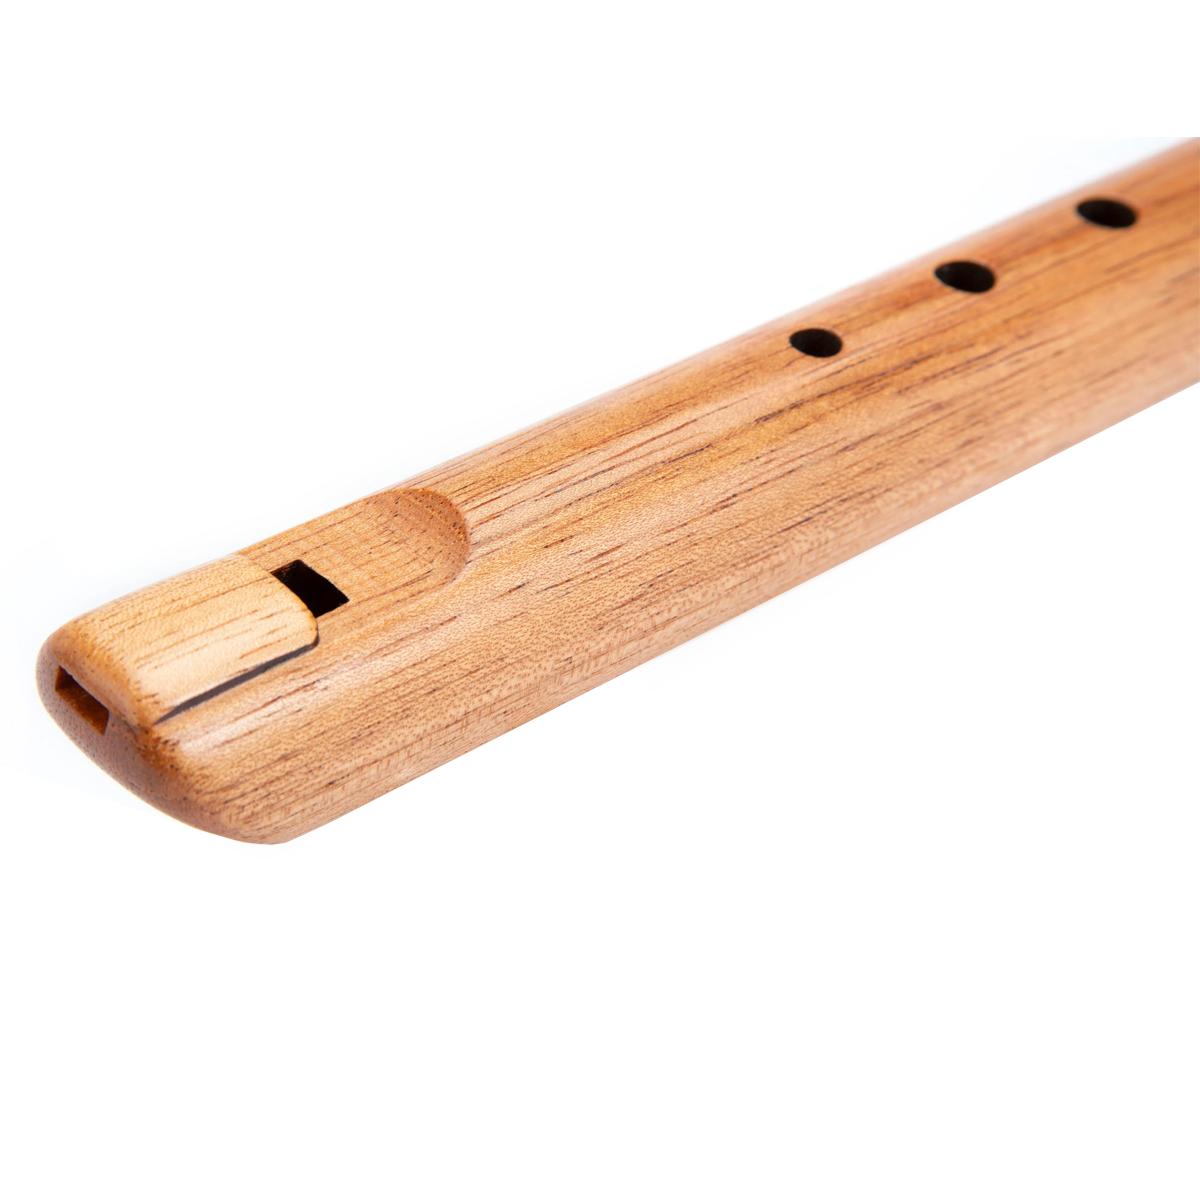 Son of drum - Traditional wooden flute - A